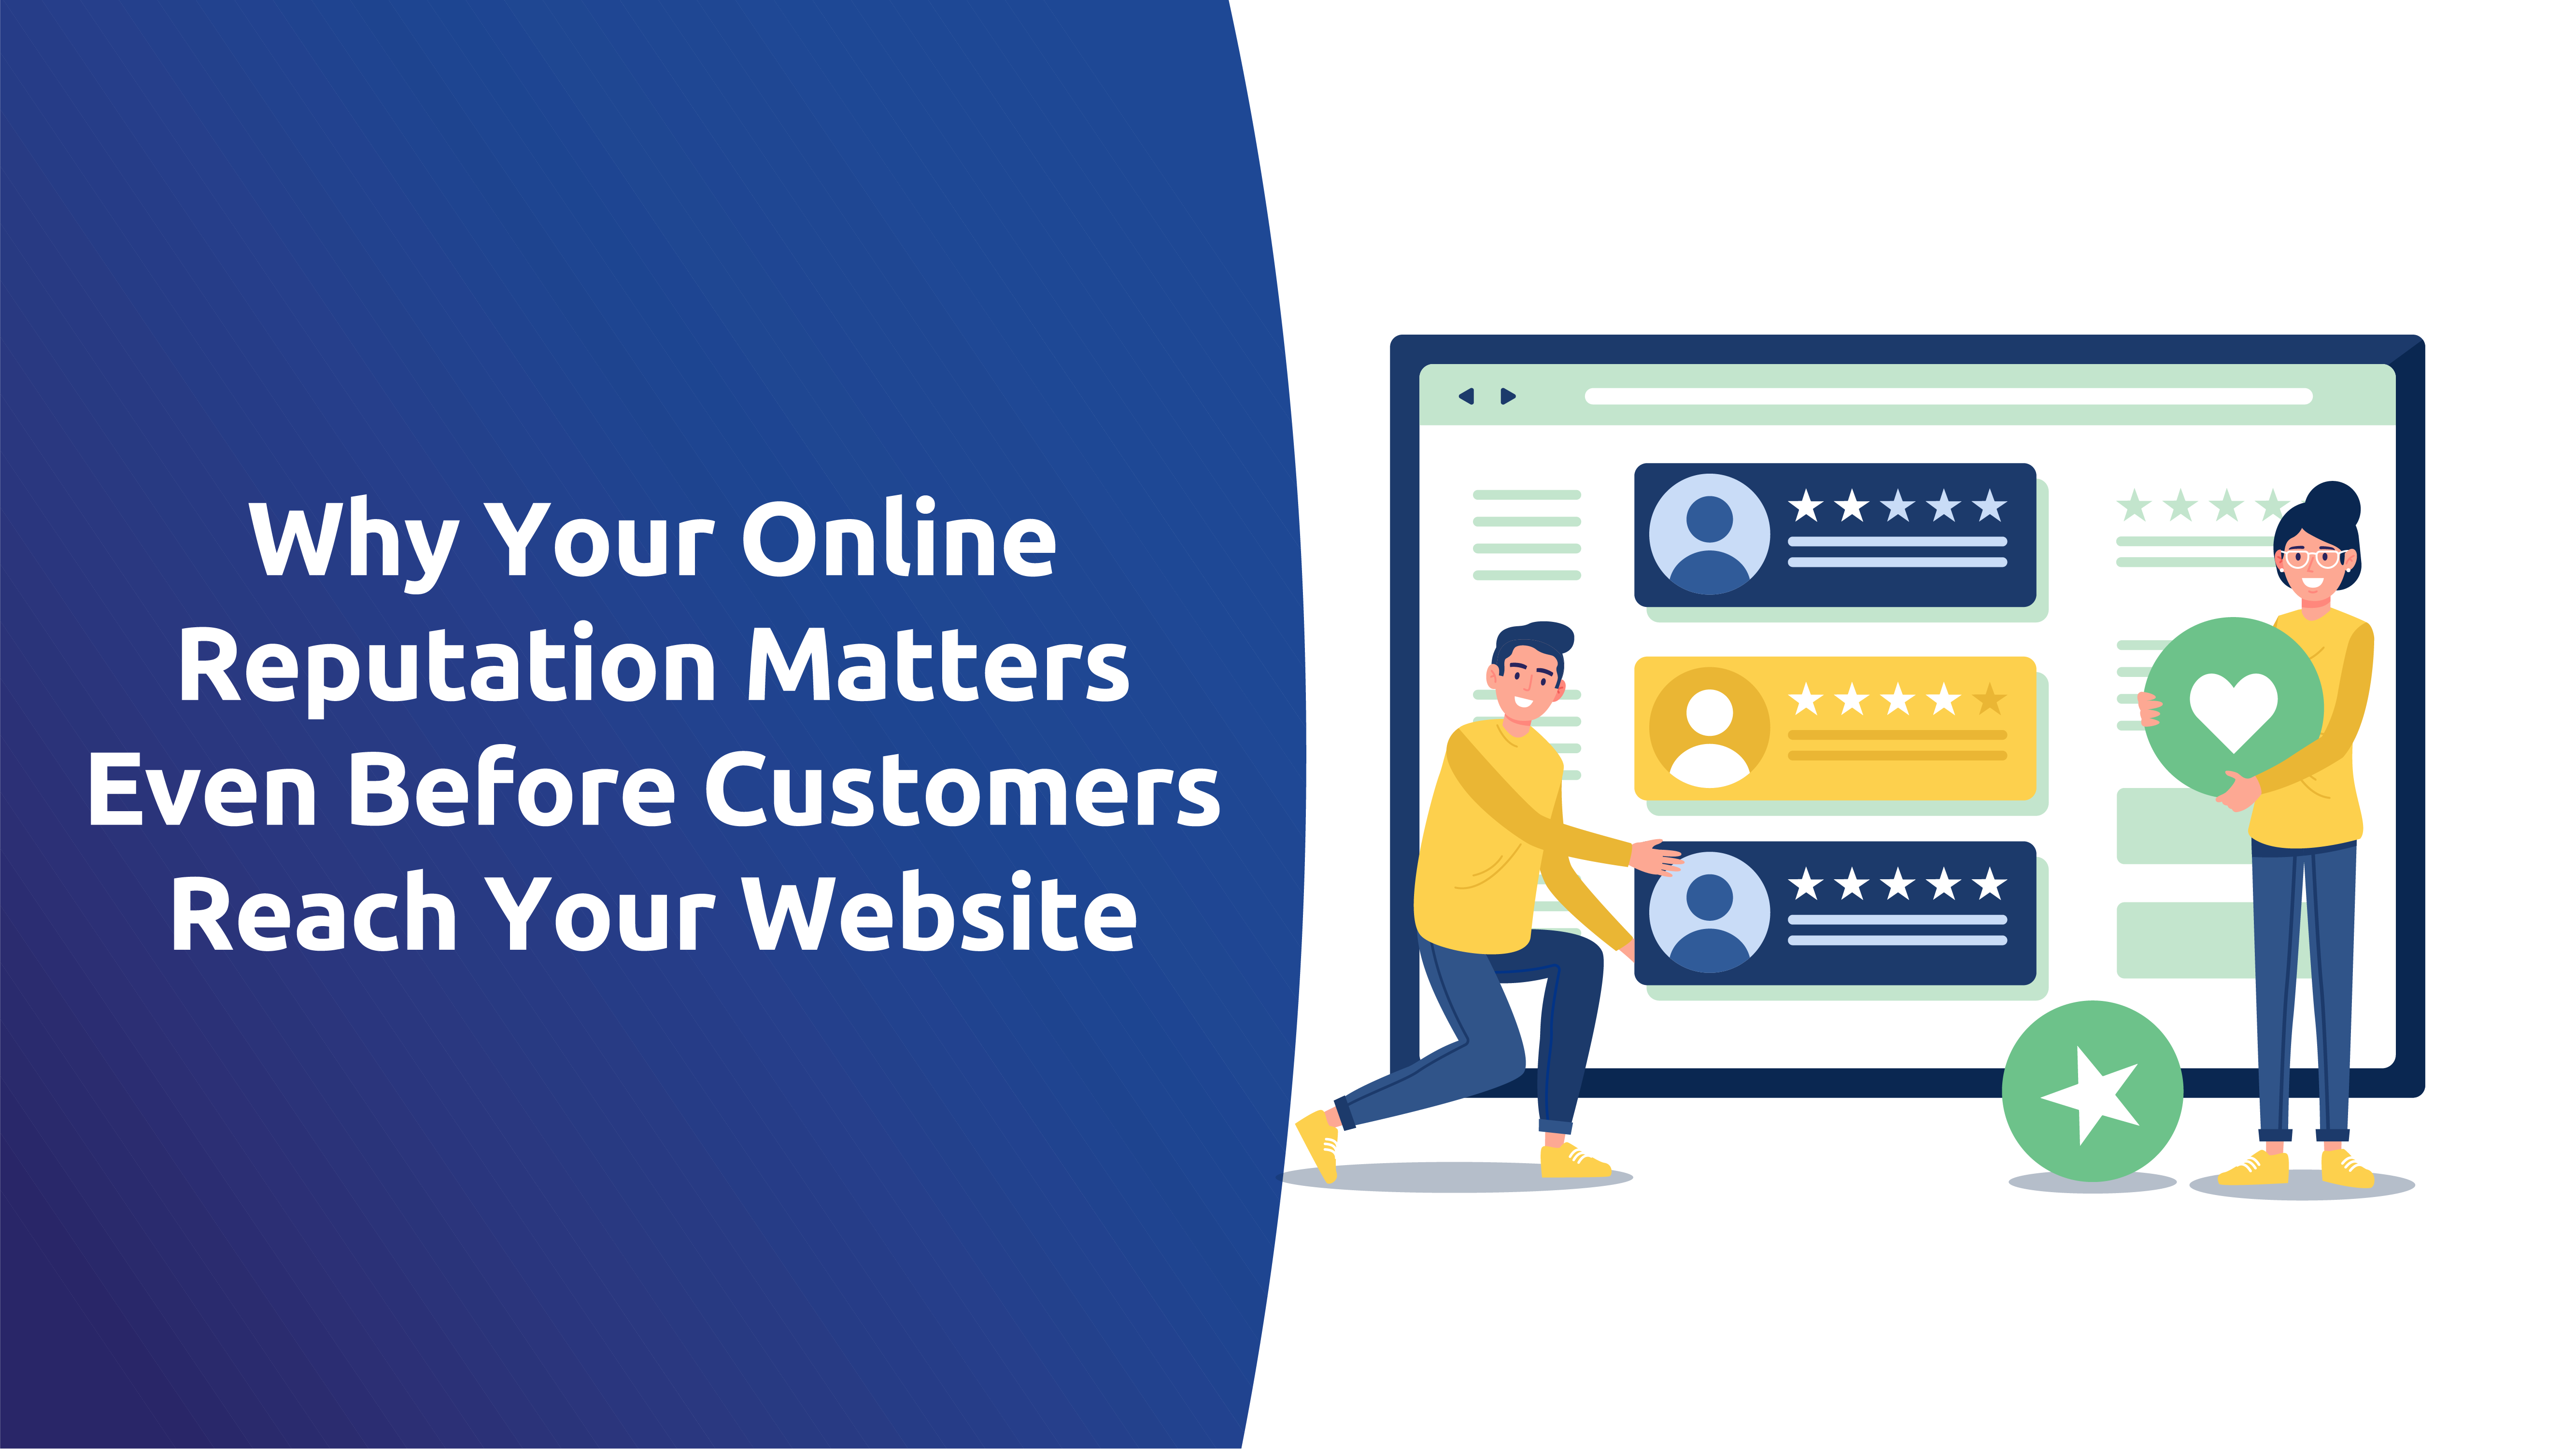 Why Your Online Reputation Matters Even Before Customers Reach Your Website